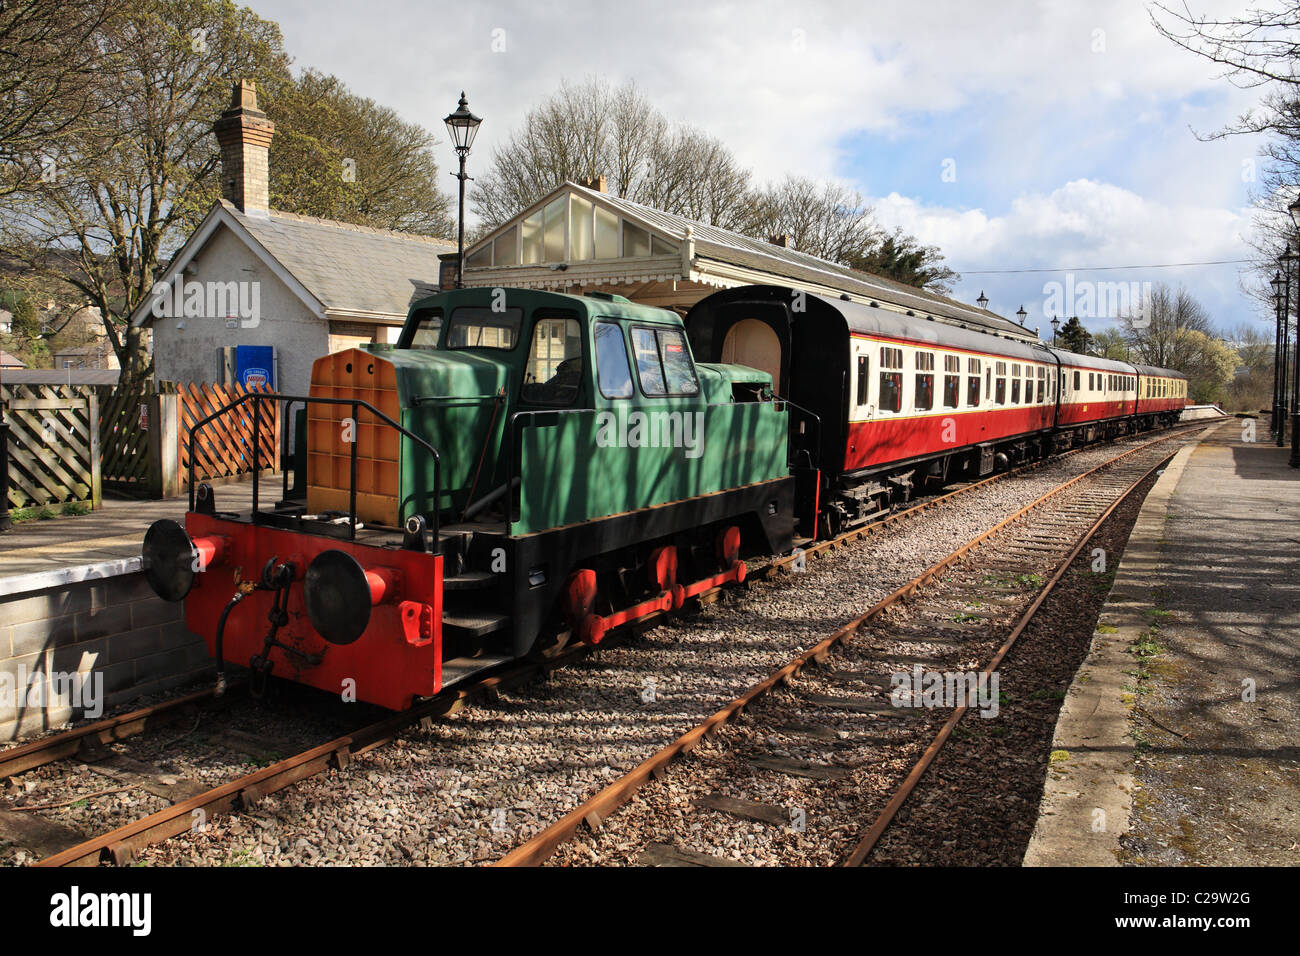 A diesel locomotive and train stands in Stanhope station, Weardale Railway, England, UK Stock Photo